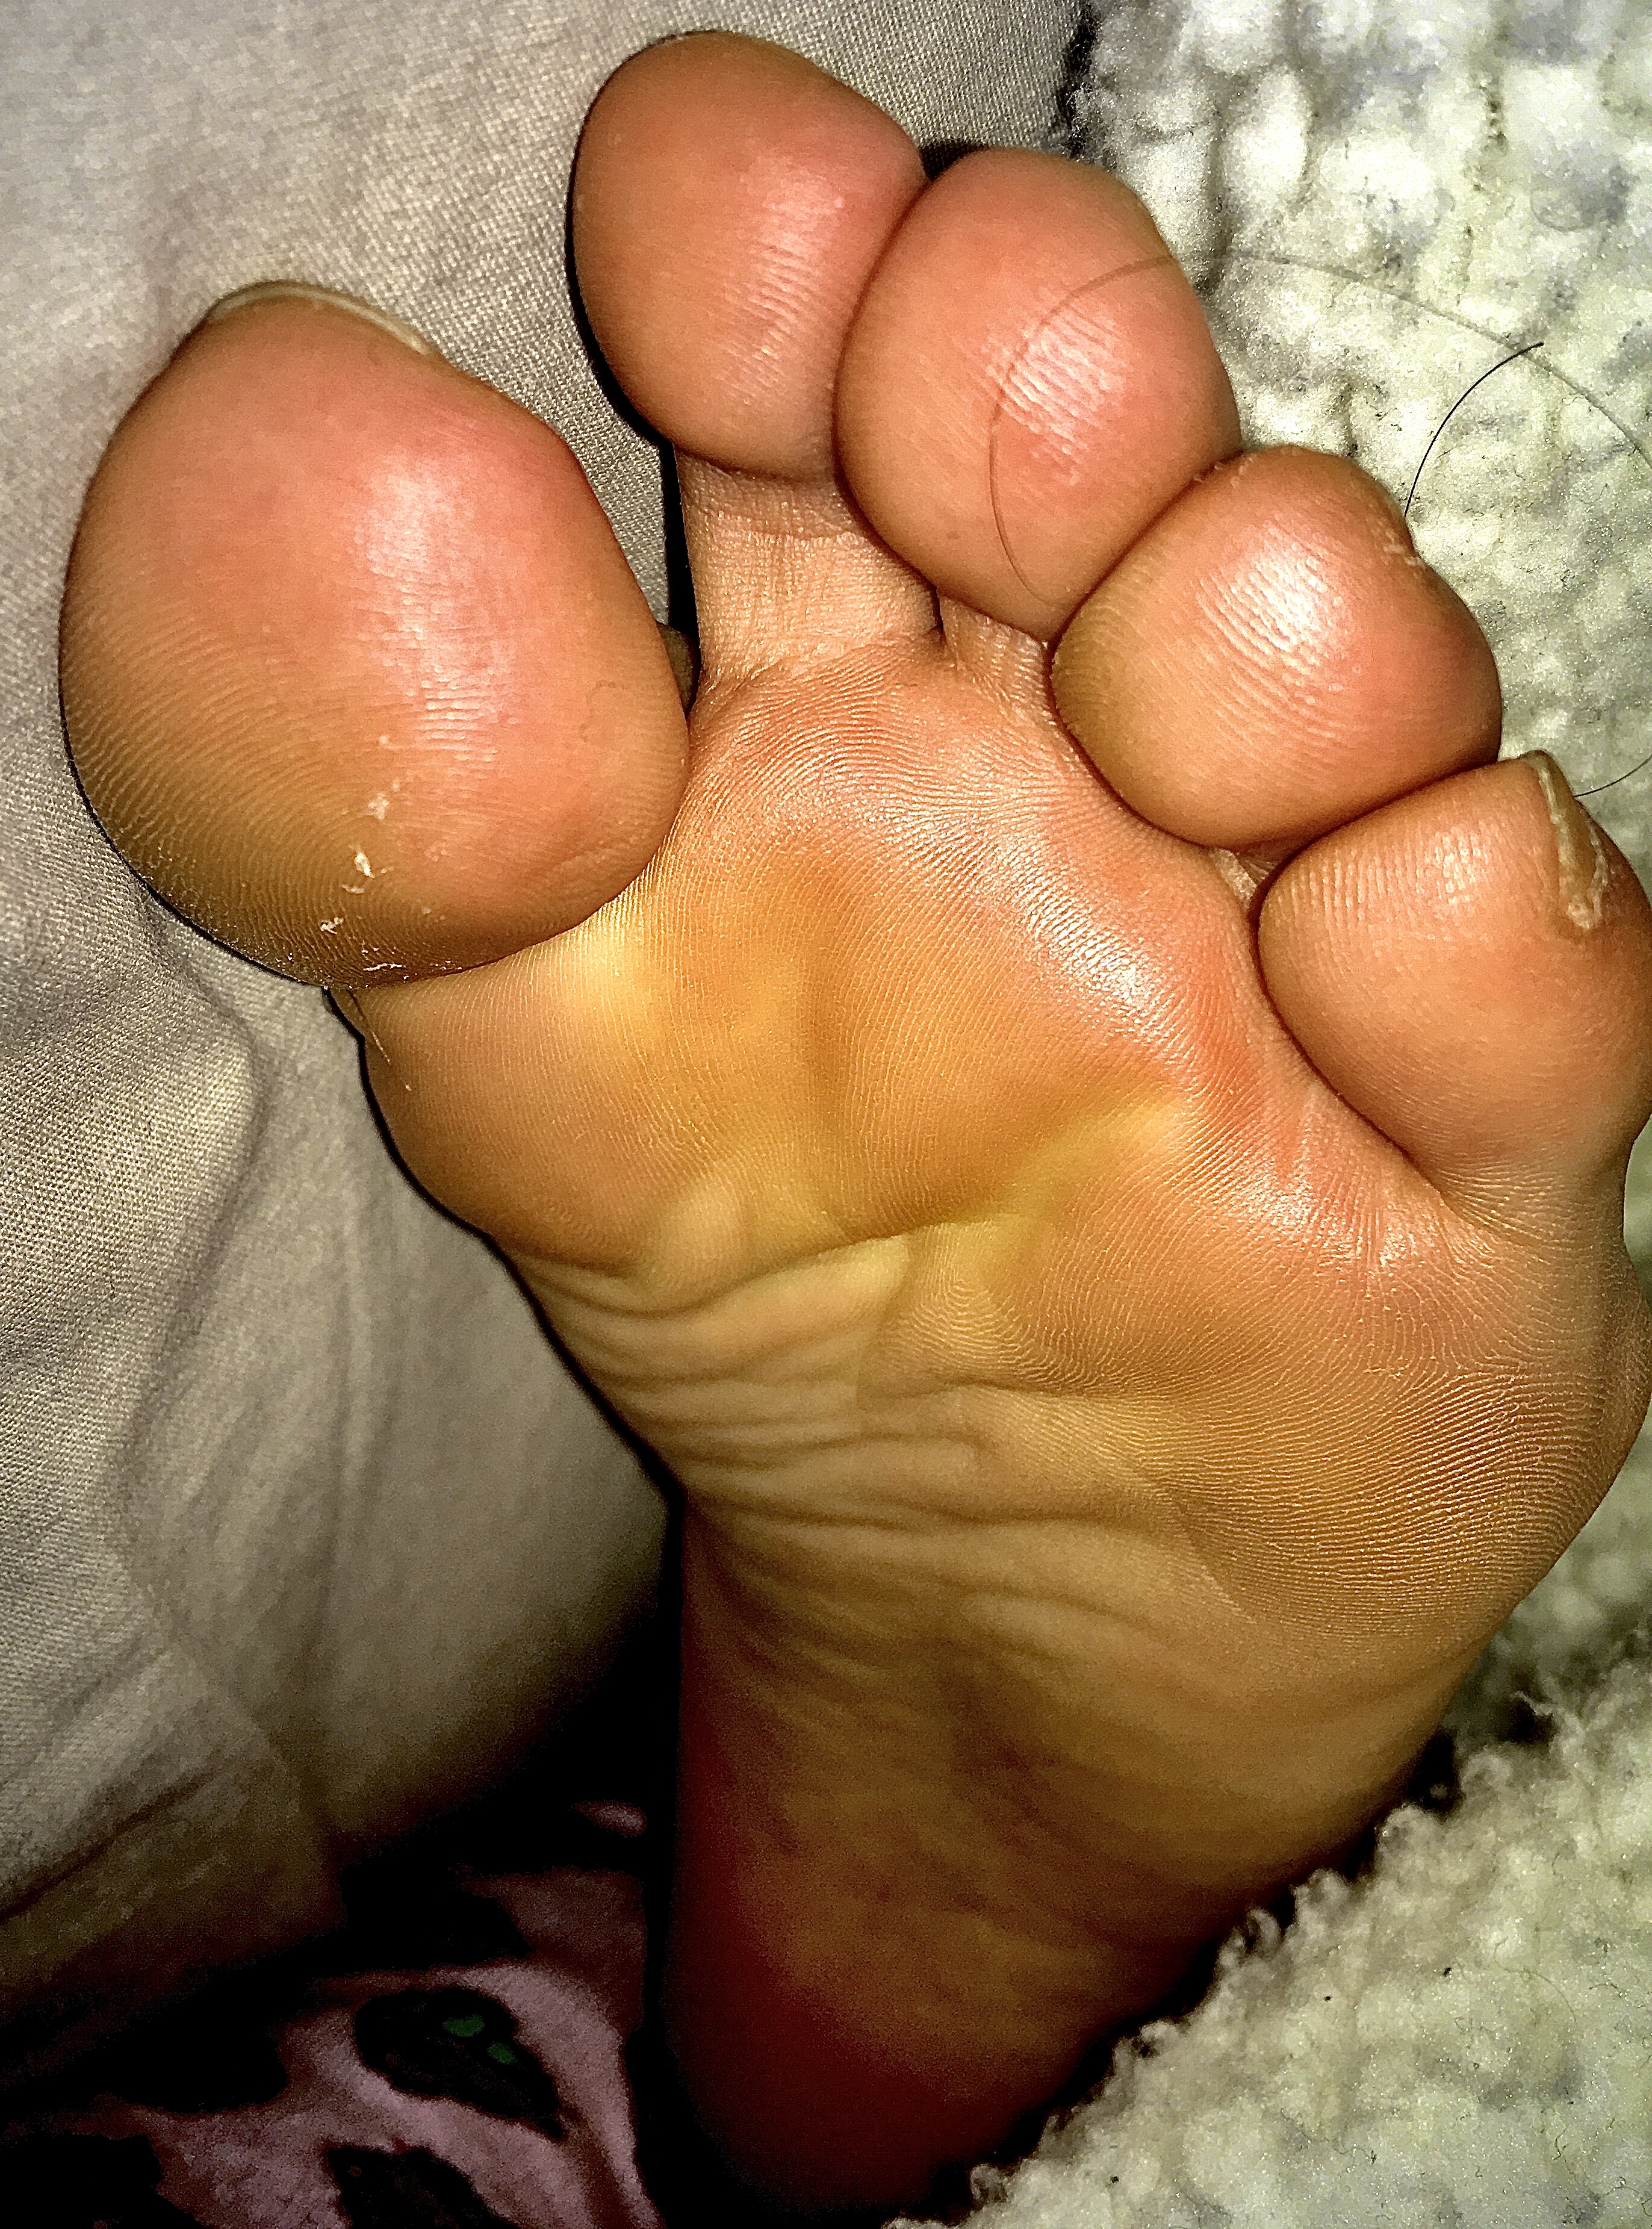 Mature milf Amateur Wife smelly wrinkled feet soles archive (58 pictures) image